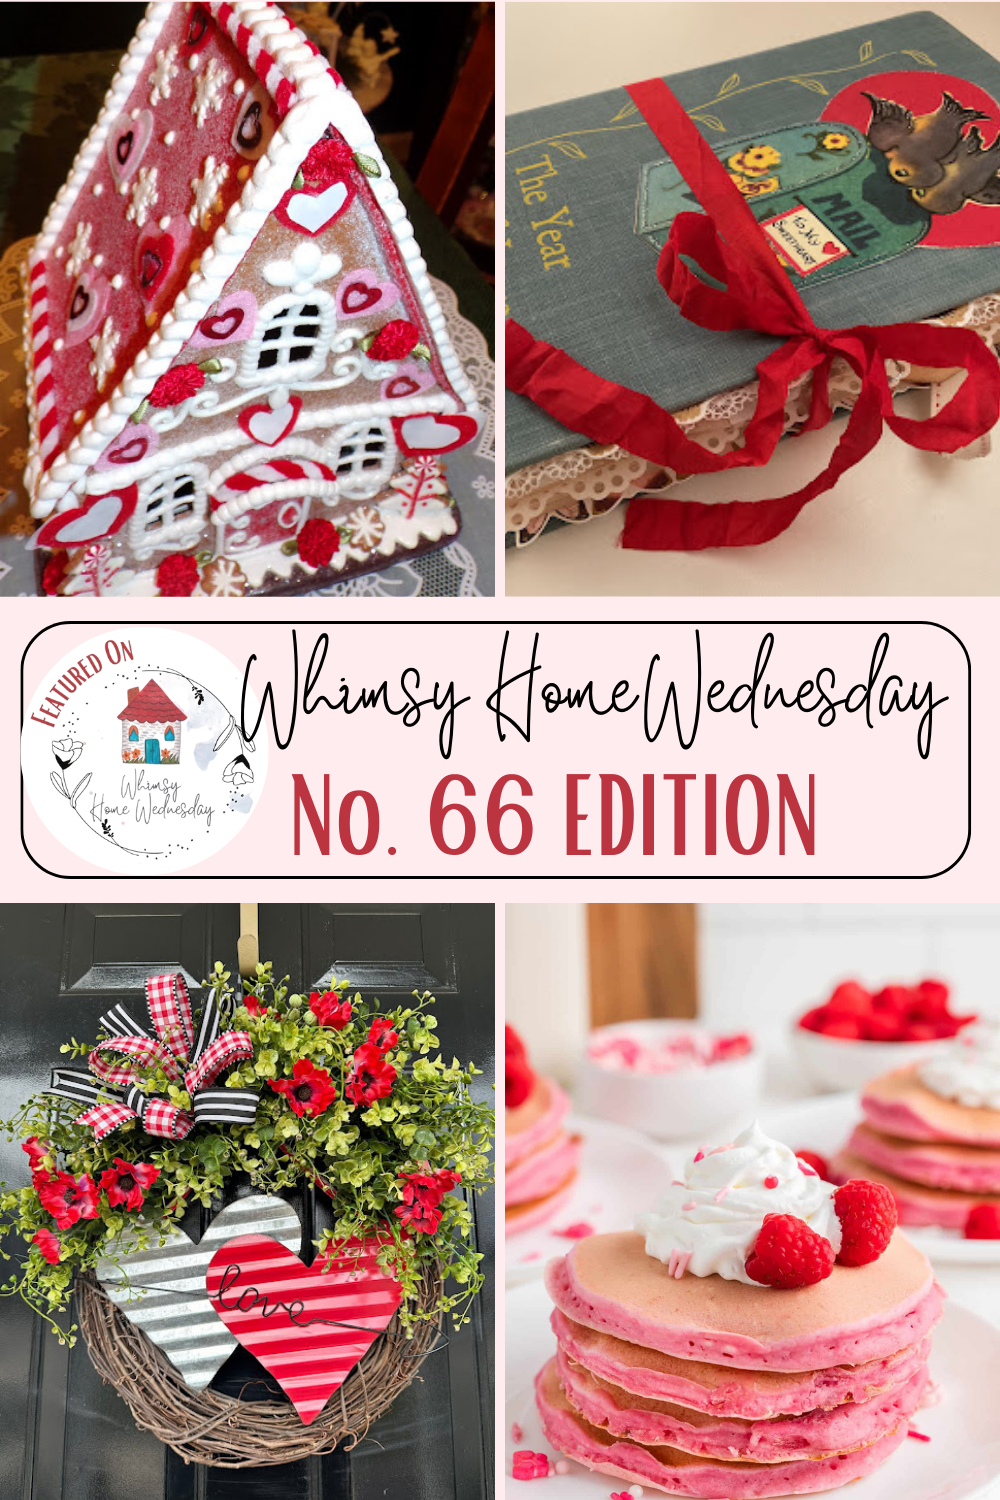 Join us on Whimsy Home Wednesday Blog Link Party No. 66 and see host projects, the features from the previous week and link up your posts!